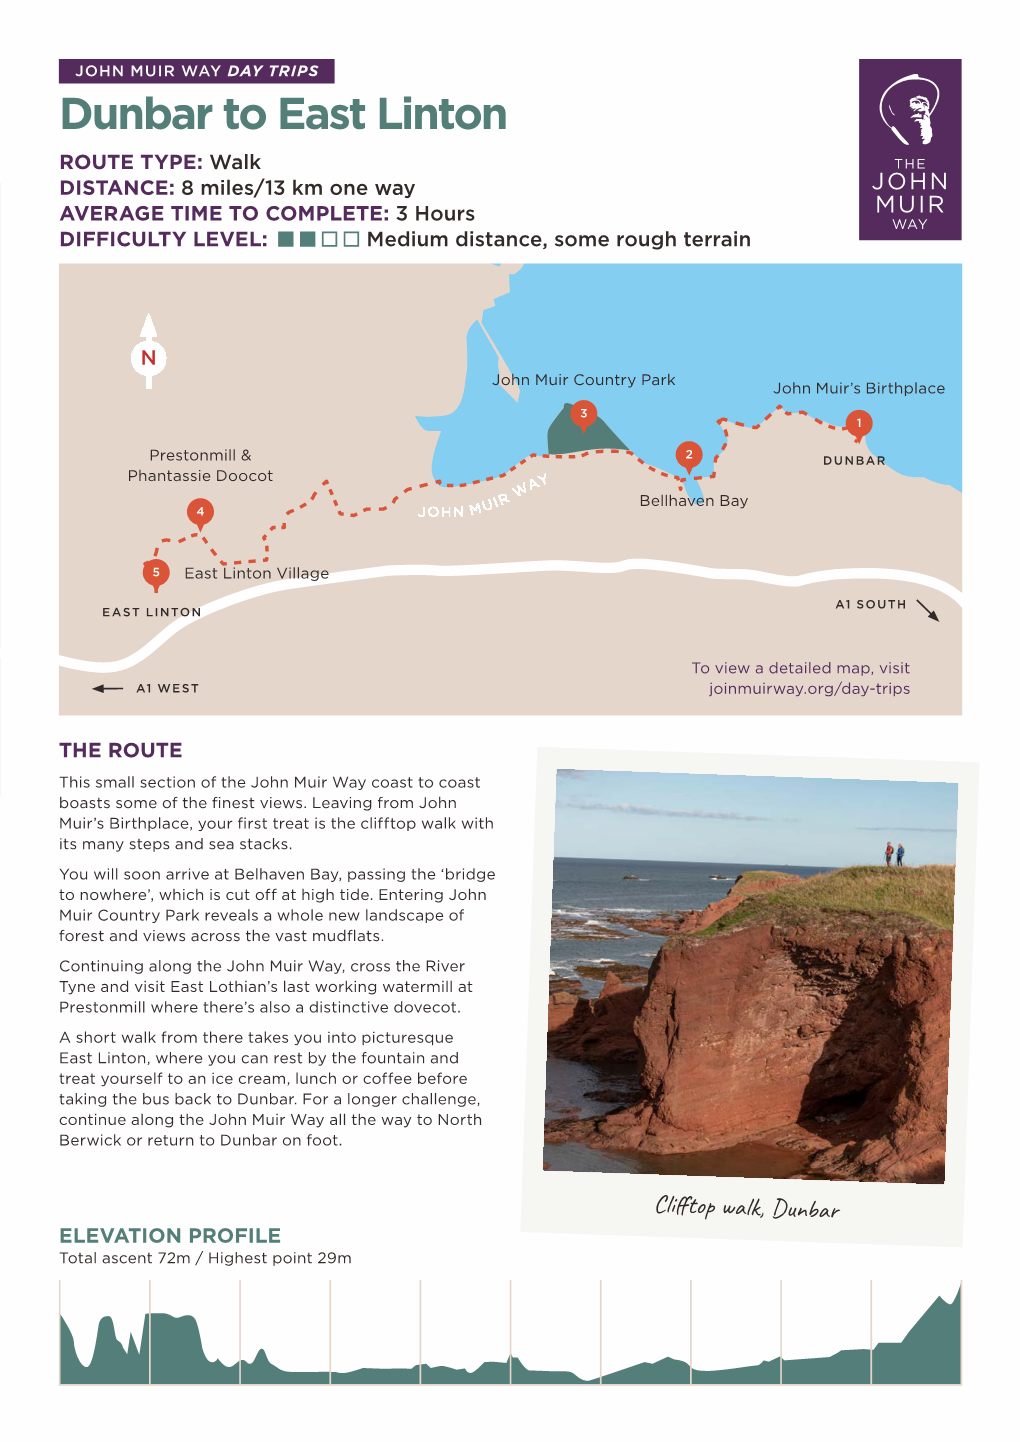 Dunbar to East Linton ROUTE TYPE: Walk DISTANCE: 8 Miles/13 Km One Way AVERAGE TIME to COMPLETE: 3 Hours DIFFICULTY LEVEL: Medium Distance, Some Rough Terrain